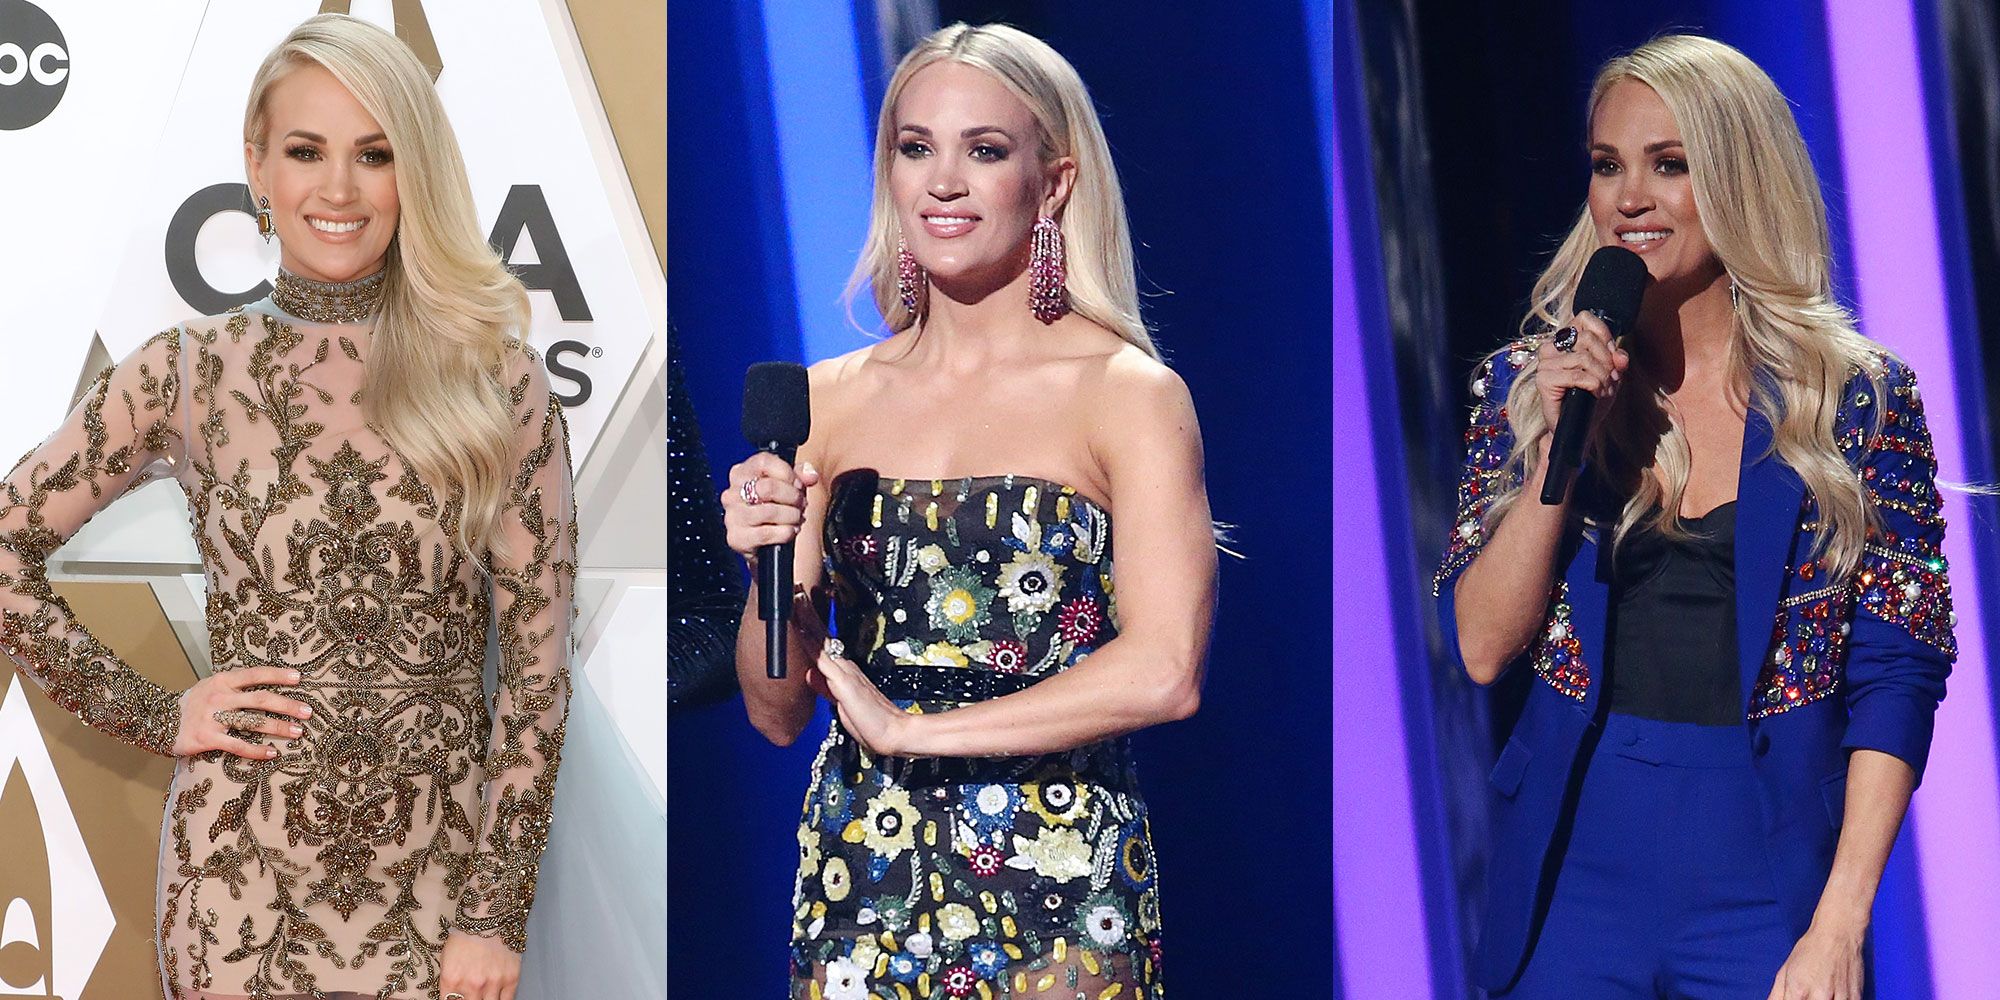 Carrie Underwood's Black Gown at 2019 ACM Awards